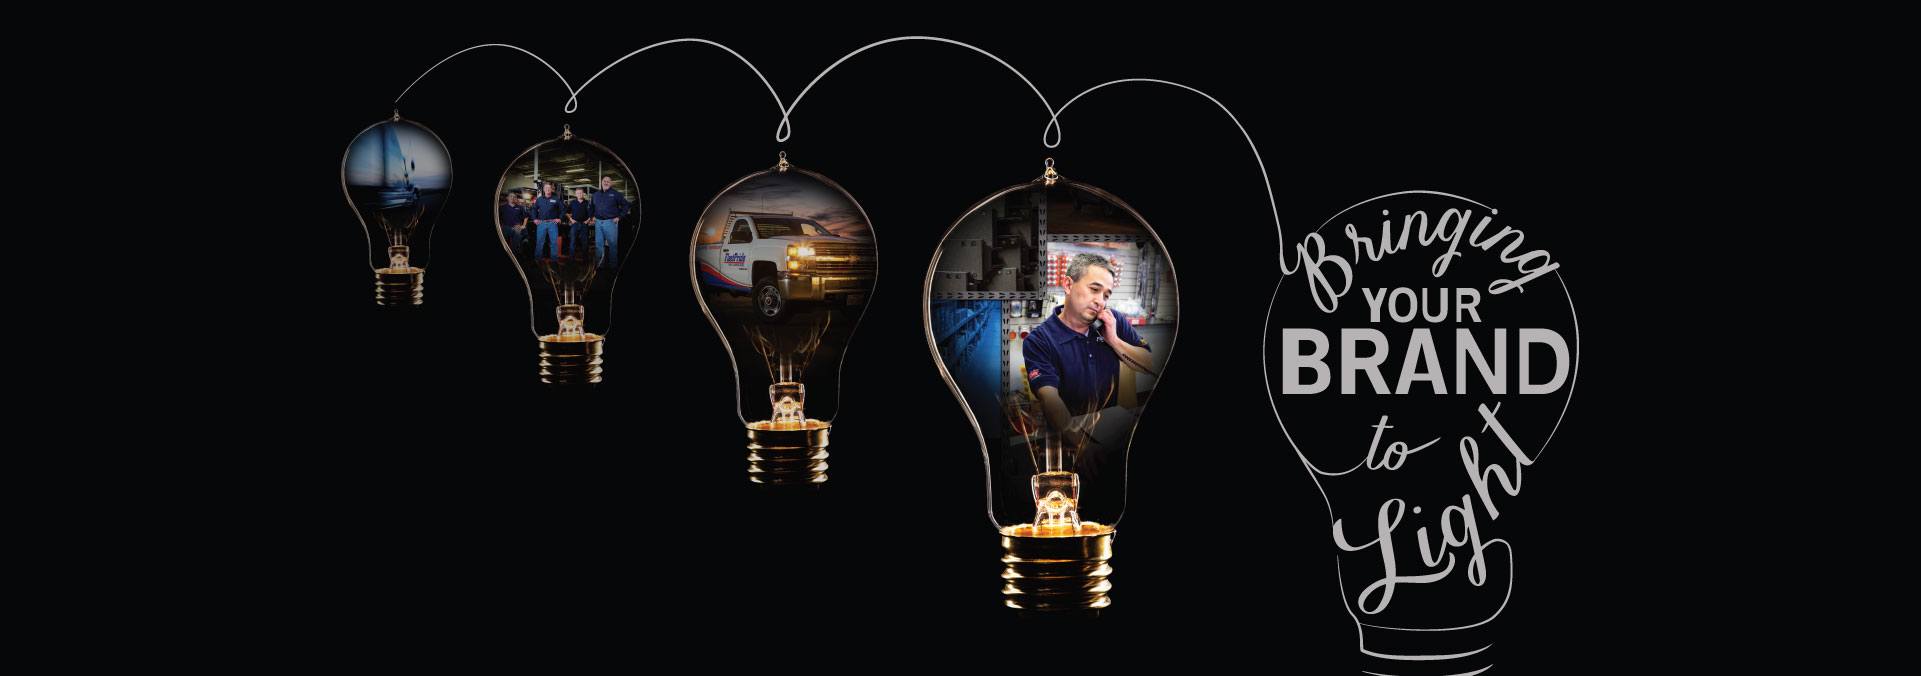 series of bulbs showcasing bringing your brand to light